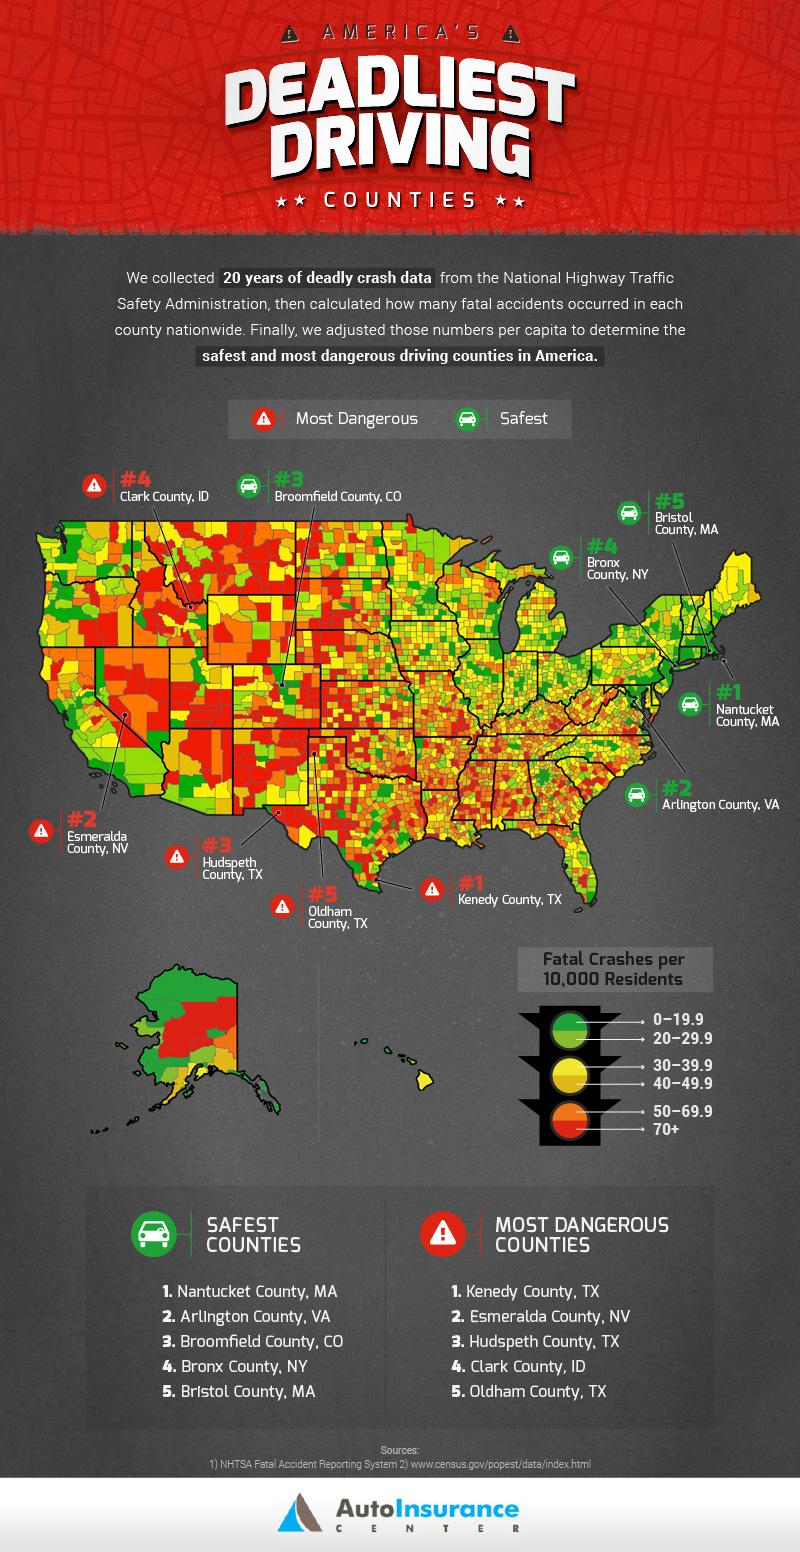 Where in the U.S. are you most likely to die in a car crash? Accident